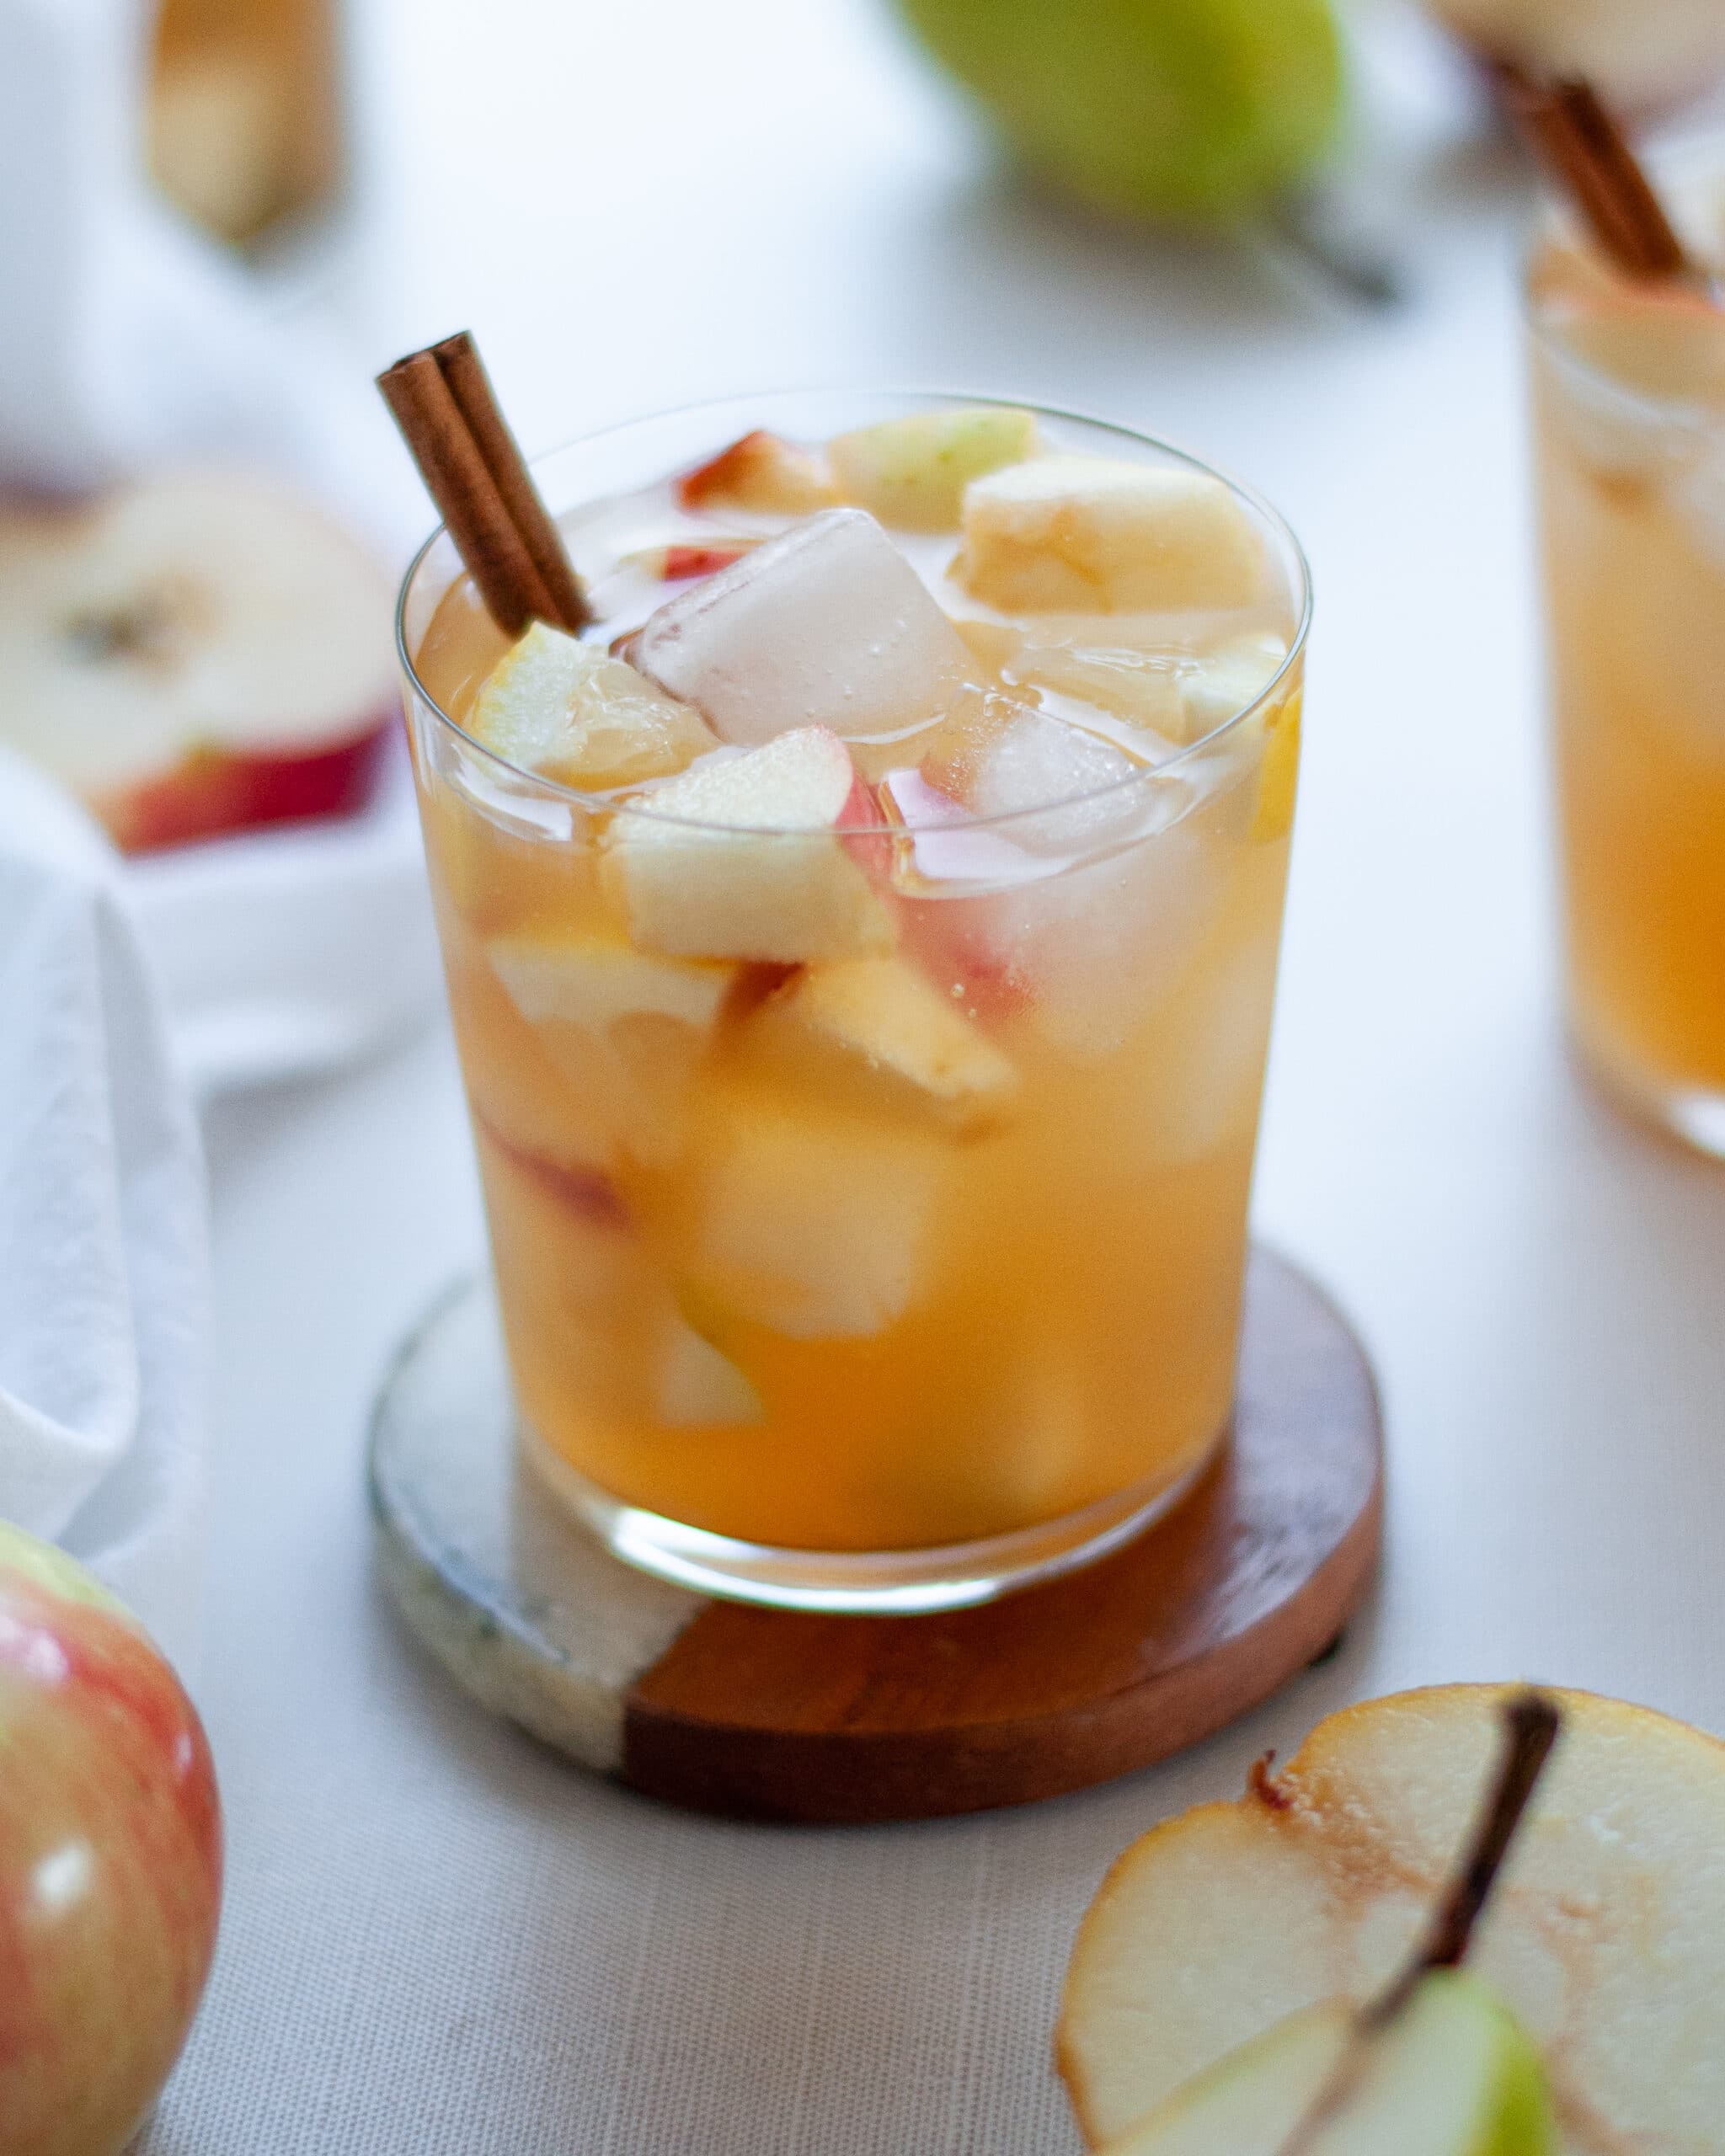 Fall White Sangria with Vodka - Our Love Language is Food